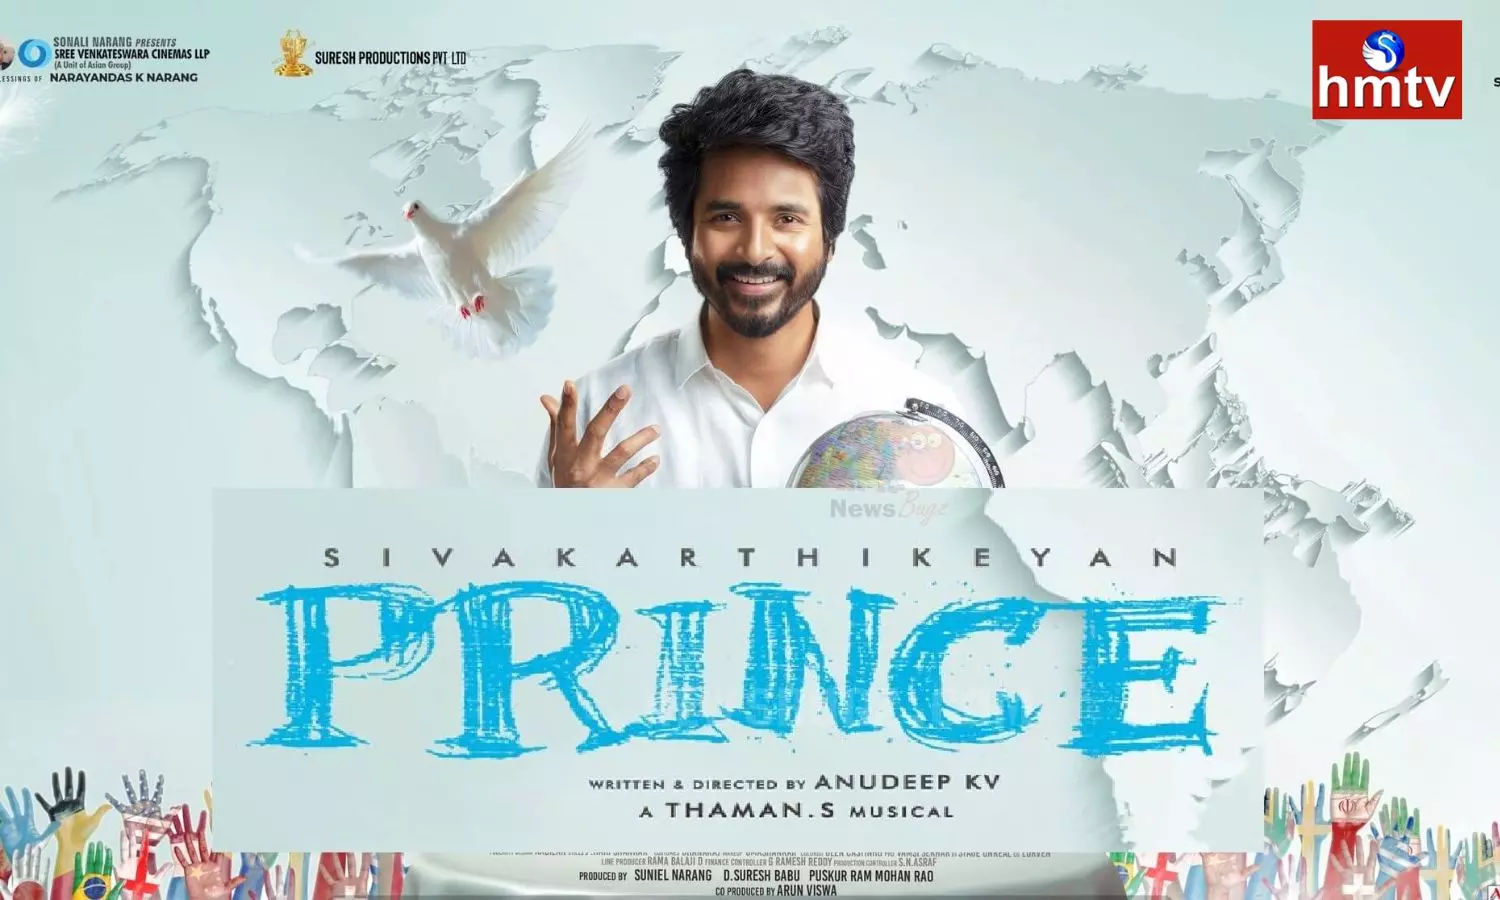 Sivakarthikeyans Prince Movie has been Trimmed By 12 Minutes